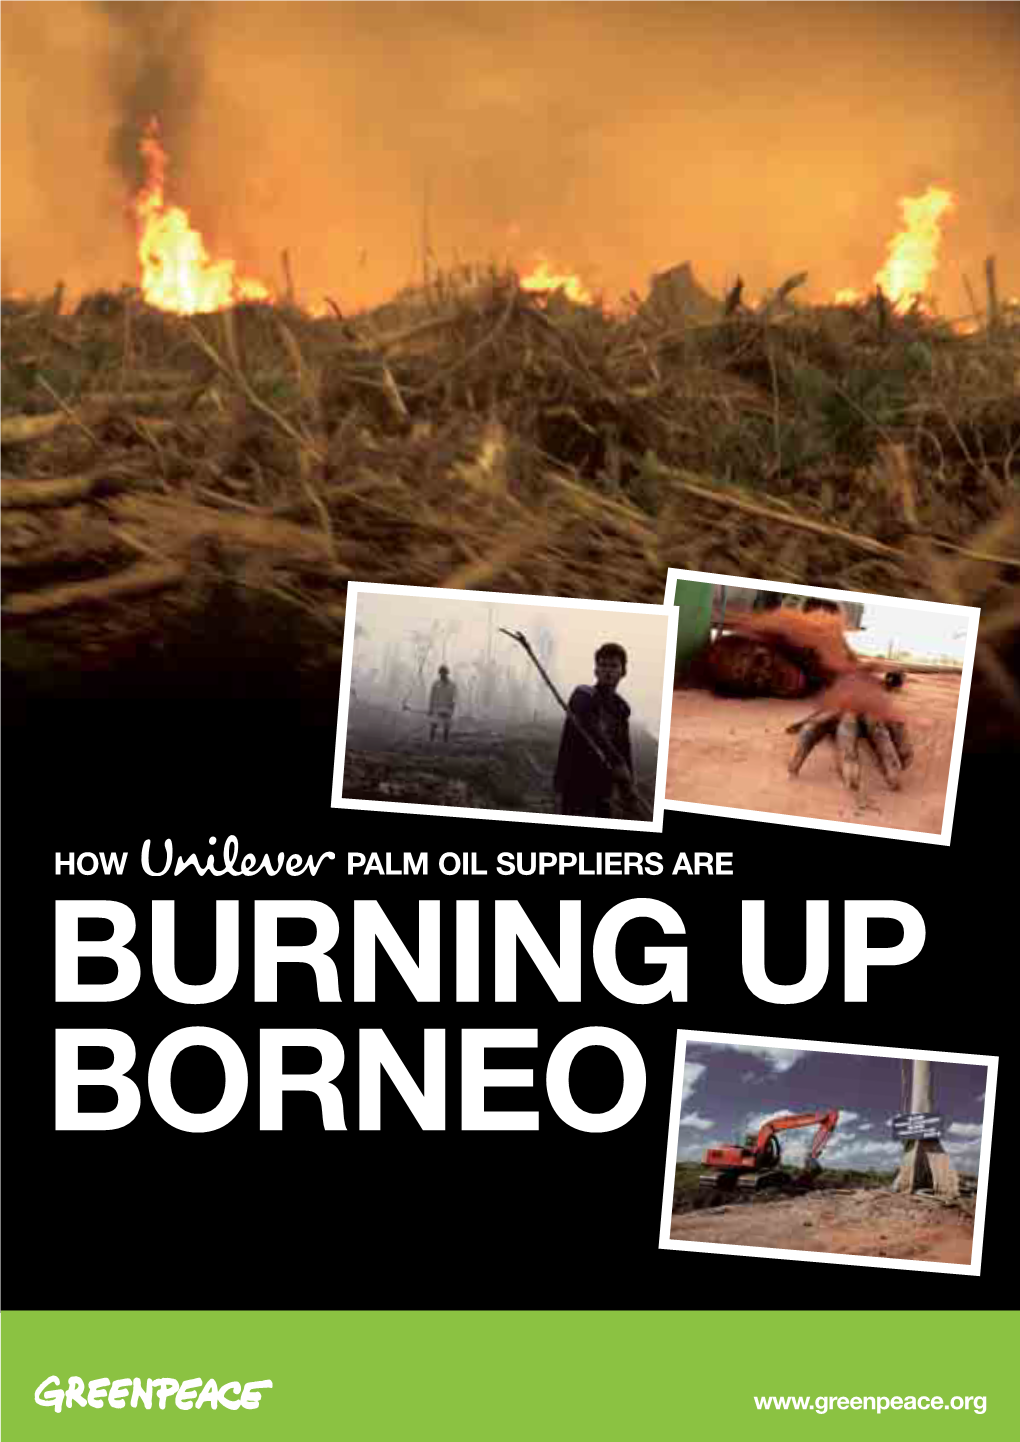 How Palm Oil Suppliers Are Burning up Borneo